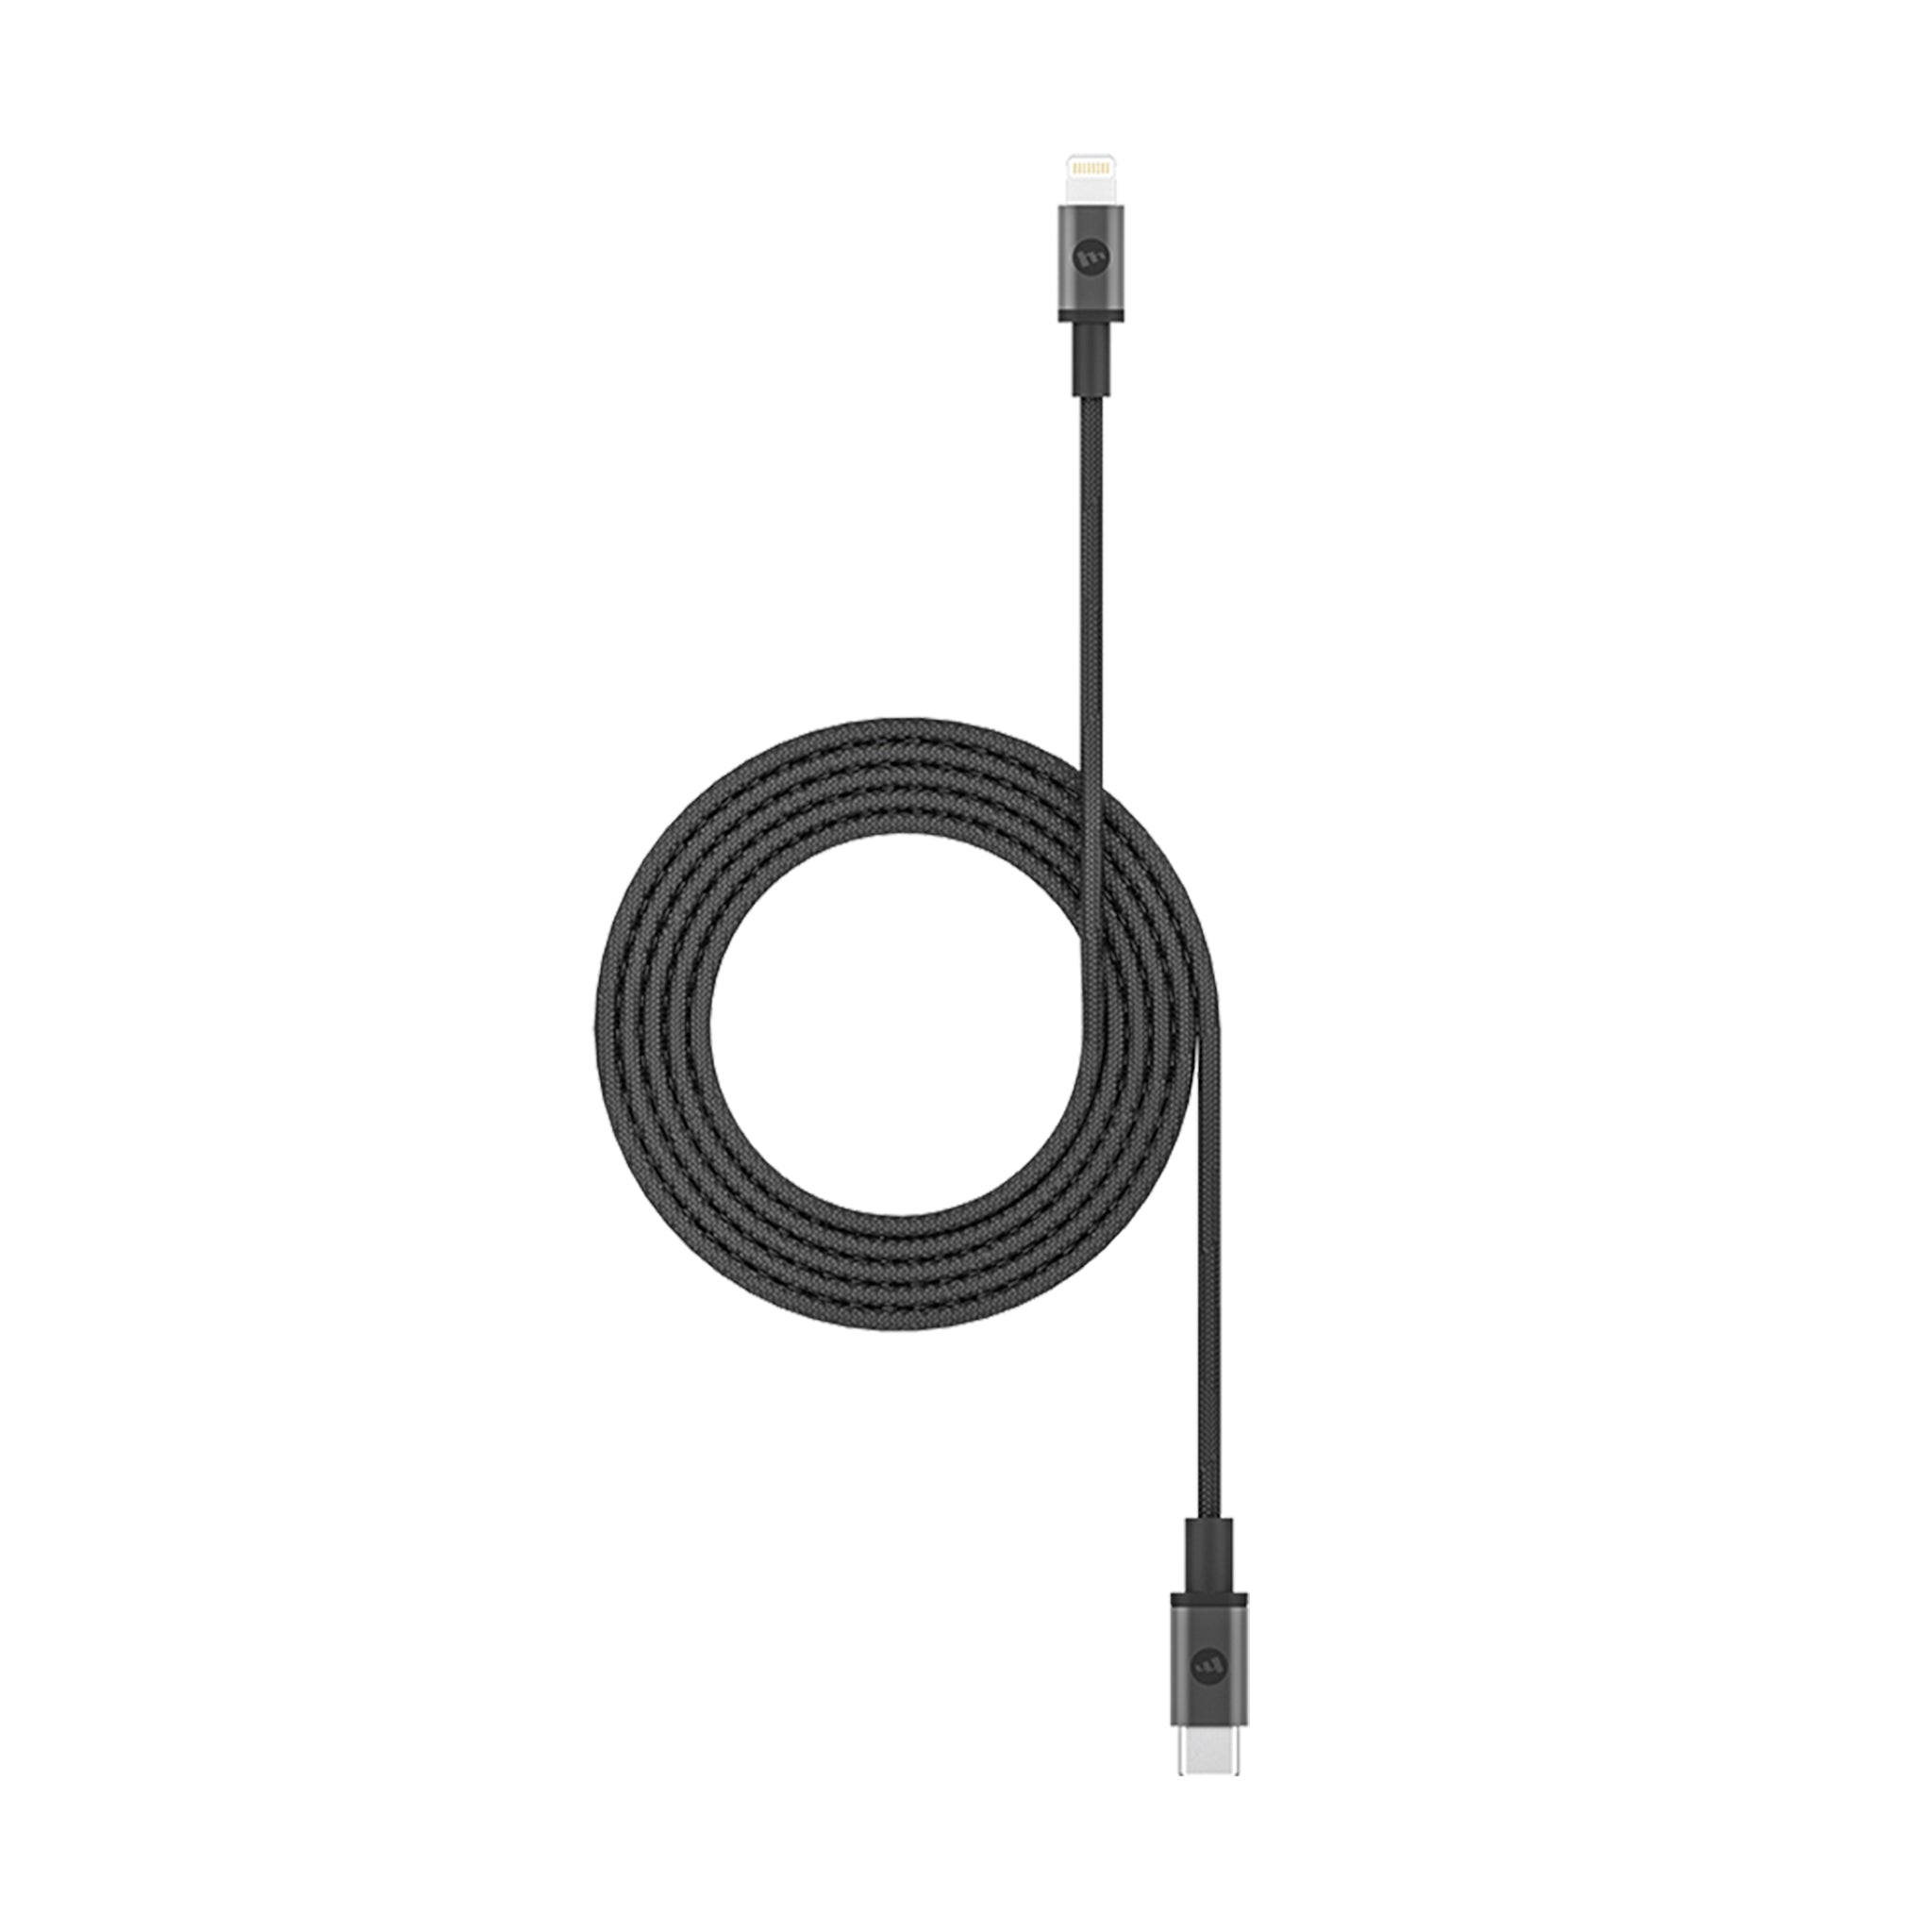 Mophie - Usb C To Apple Lightning Cable 6ft - Black